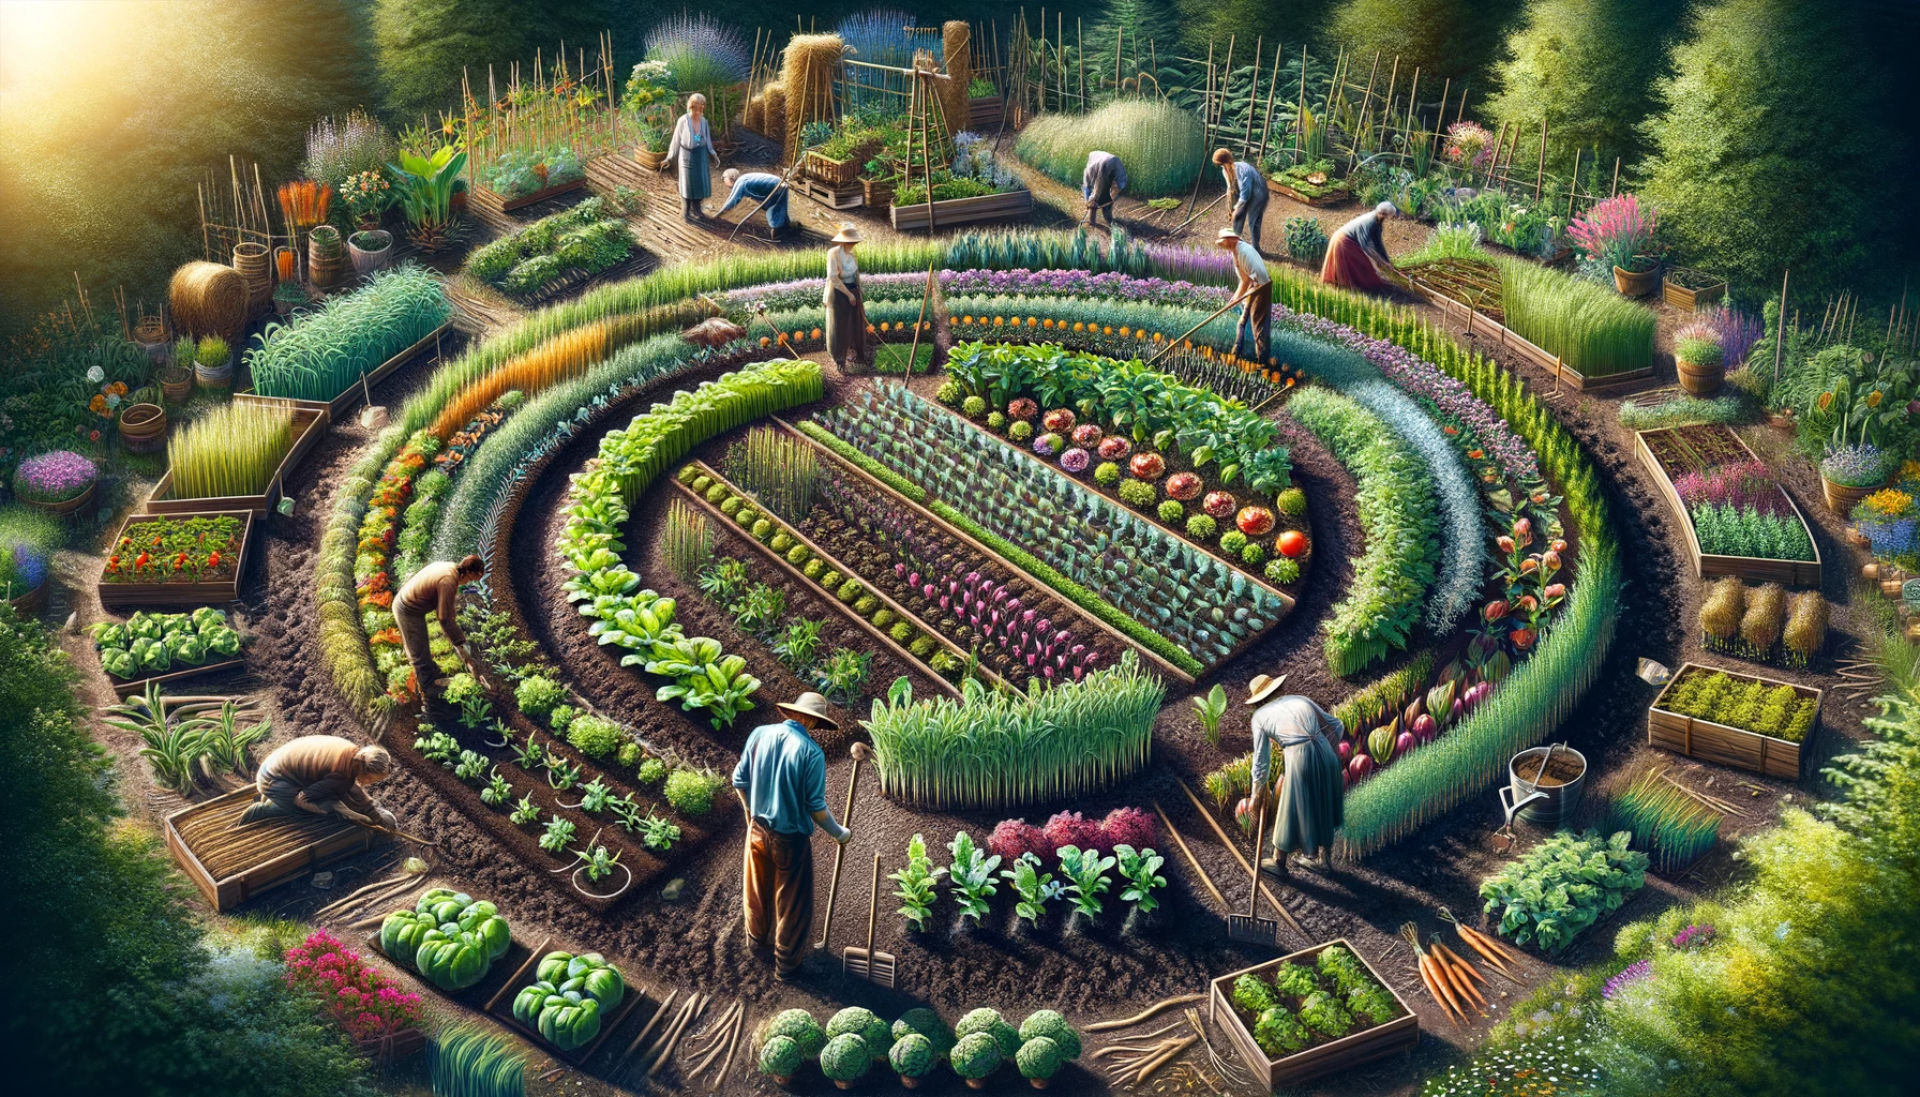 Planting and Crop Rotation: This image captures the essence of the planting phase in biodynamic gardening. It shows diverse crops being strategically planted in a rotated pattern, emphasizing the importance of crop diversity and rotation in maintaining soil health and ecosystem balance.